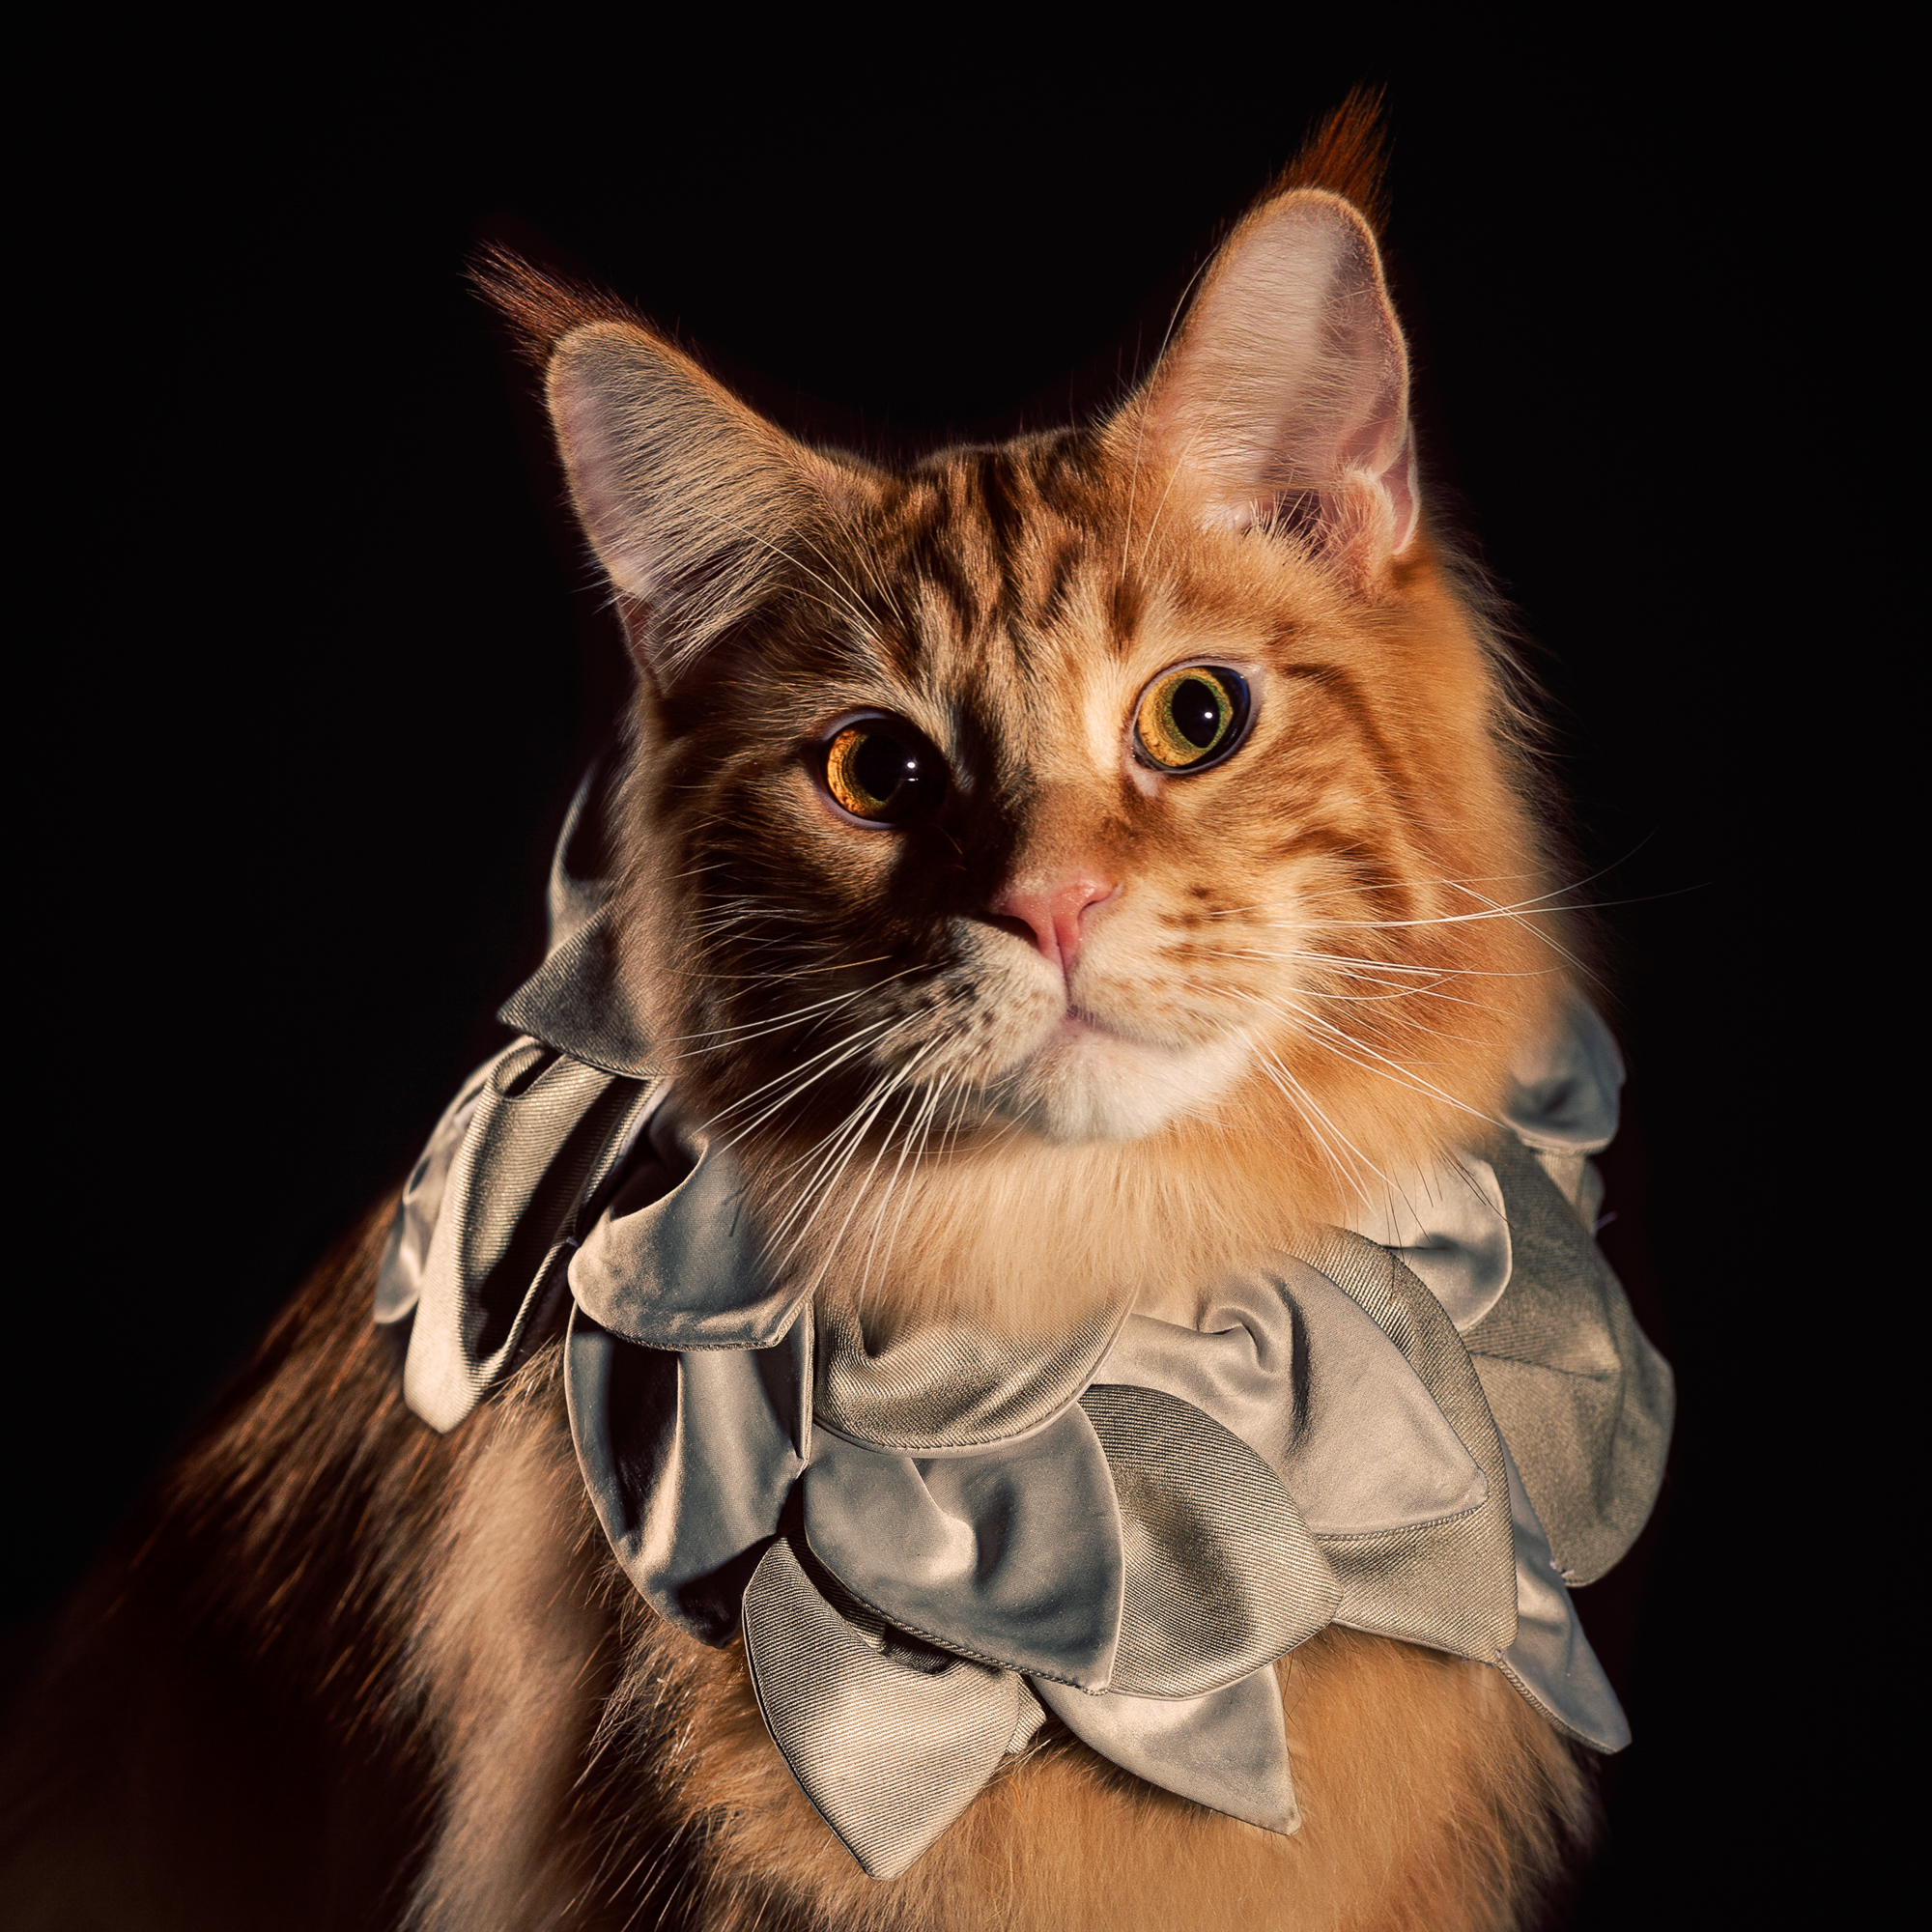    Known as the “gentle giants” of the cat world, this handsome Maine Coon,  Furelight of Concordance,  adorns this beautifully structured, shimmery-peddled collar by the wildly talented Liza Reitz. 